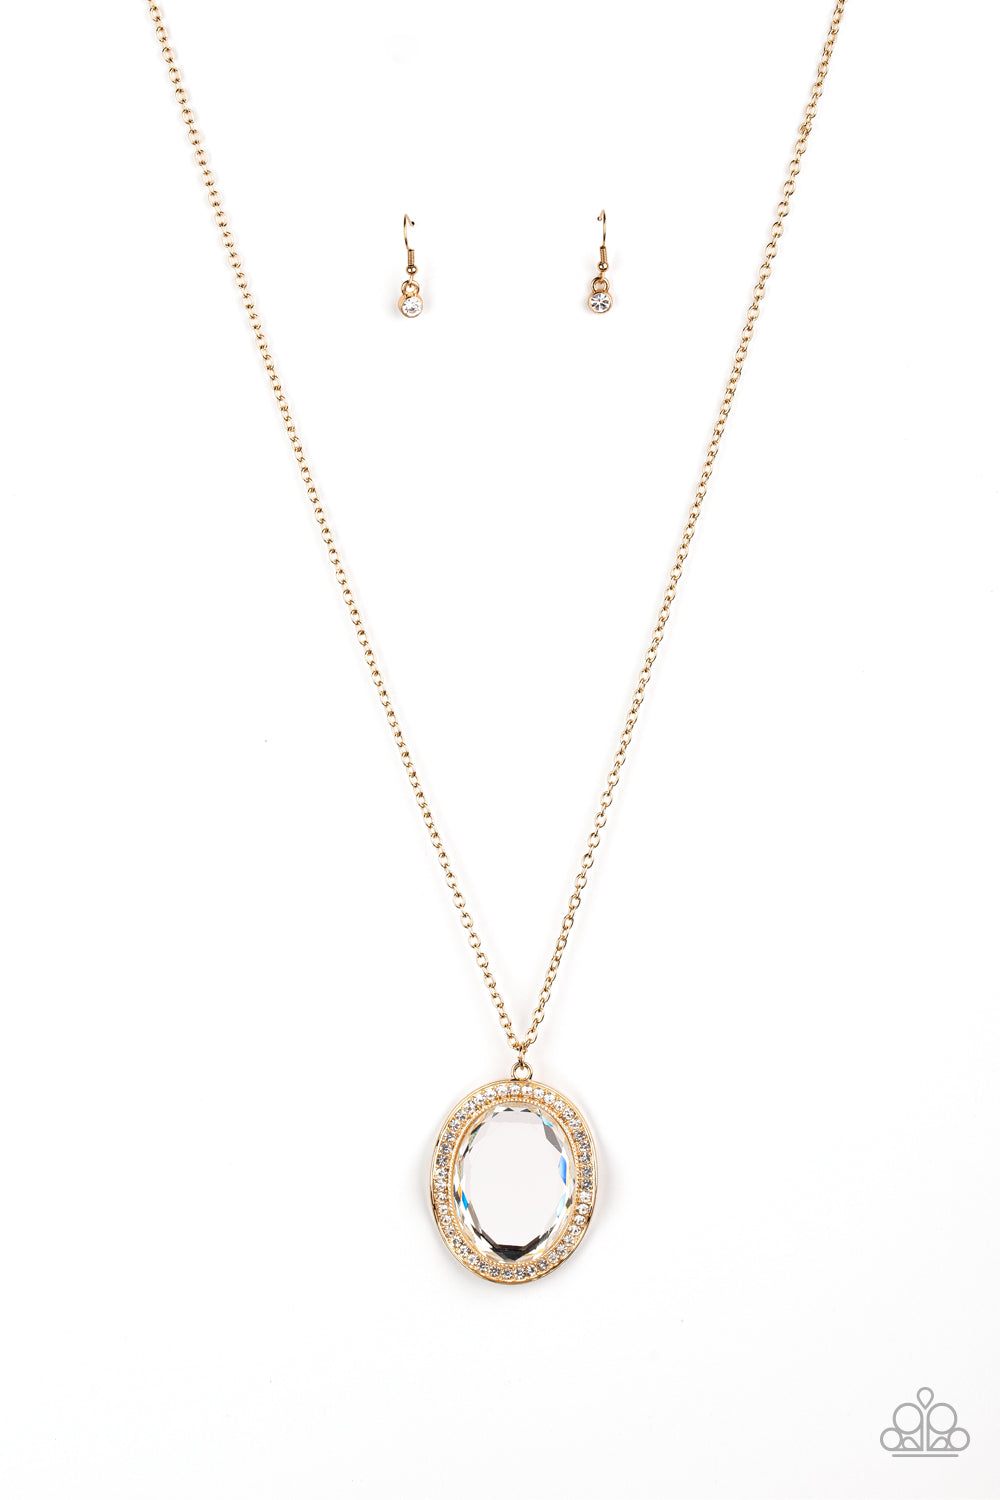 REIGN THEM IN - GOLD NECKLACE